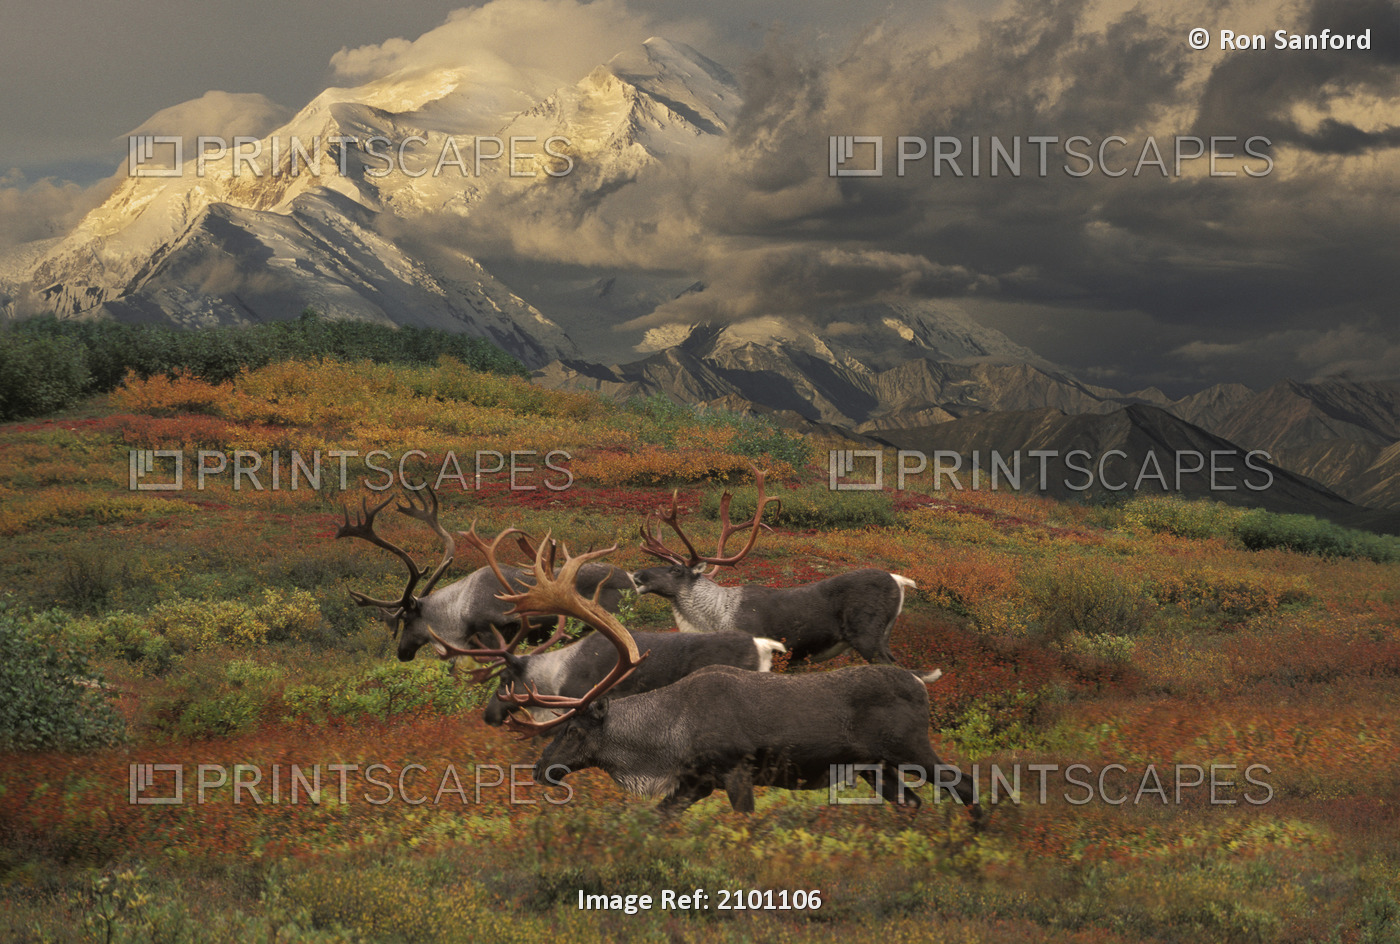 Compostie Caribou Graze On Tundra During Autumn With Mt. Mckinley In The ...